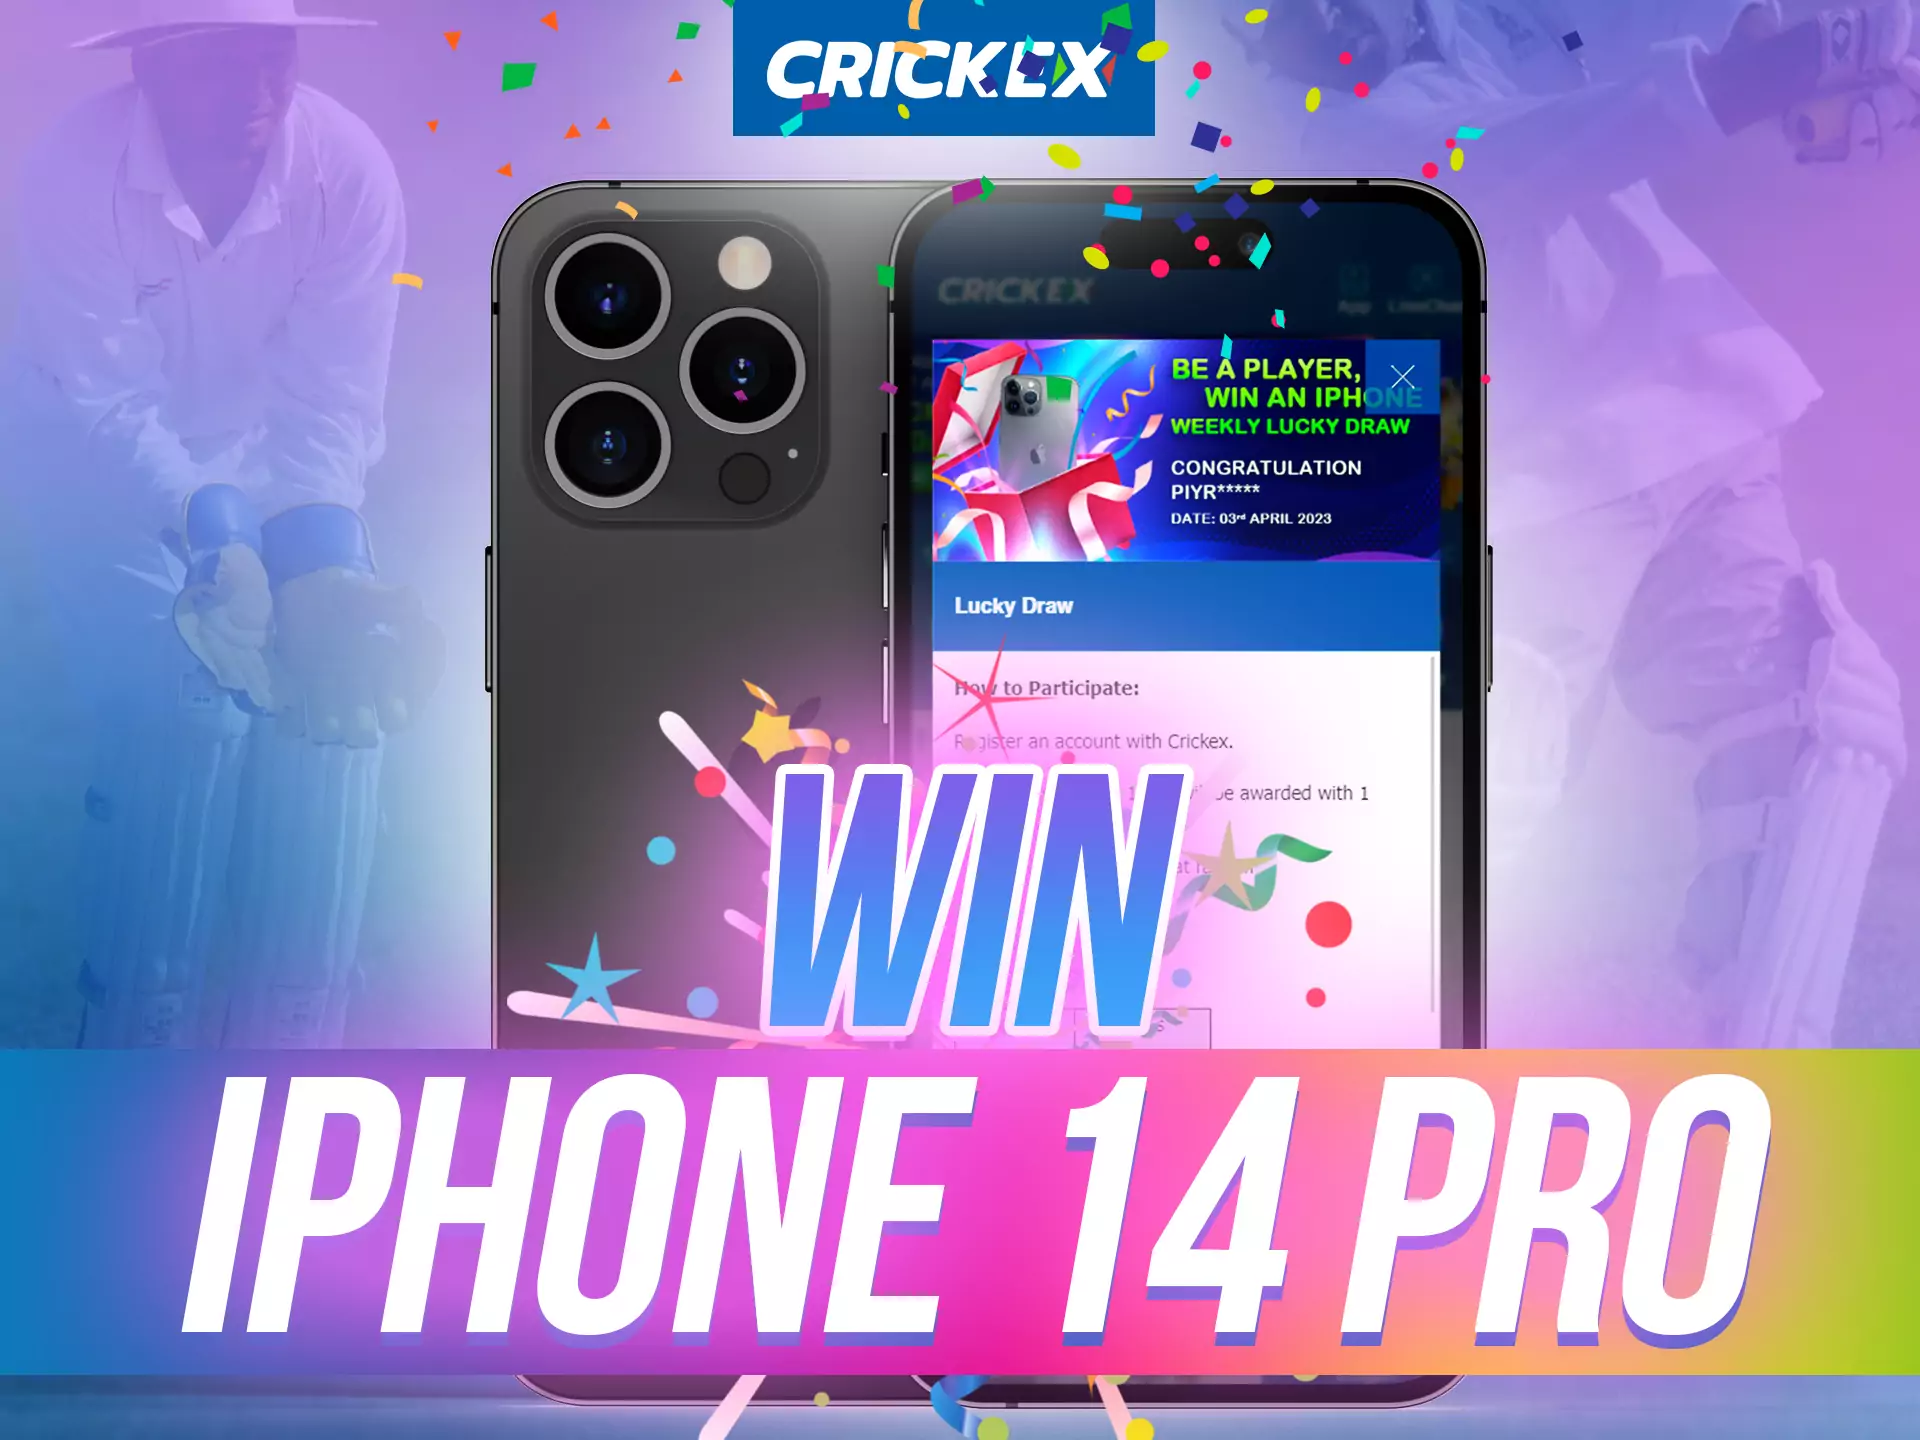 Crickex app gives away a prize every week, take part.